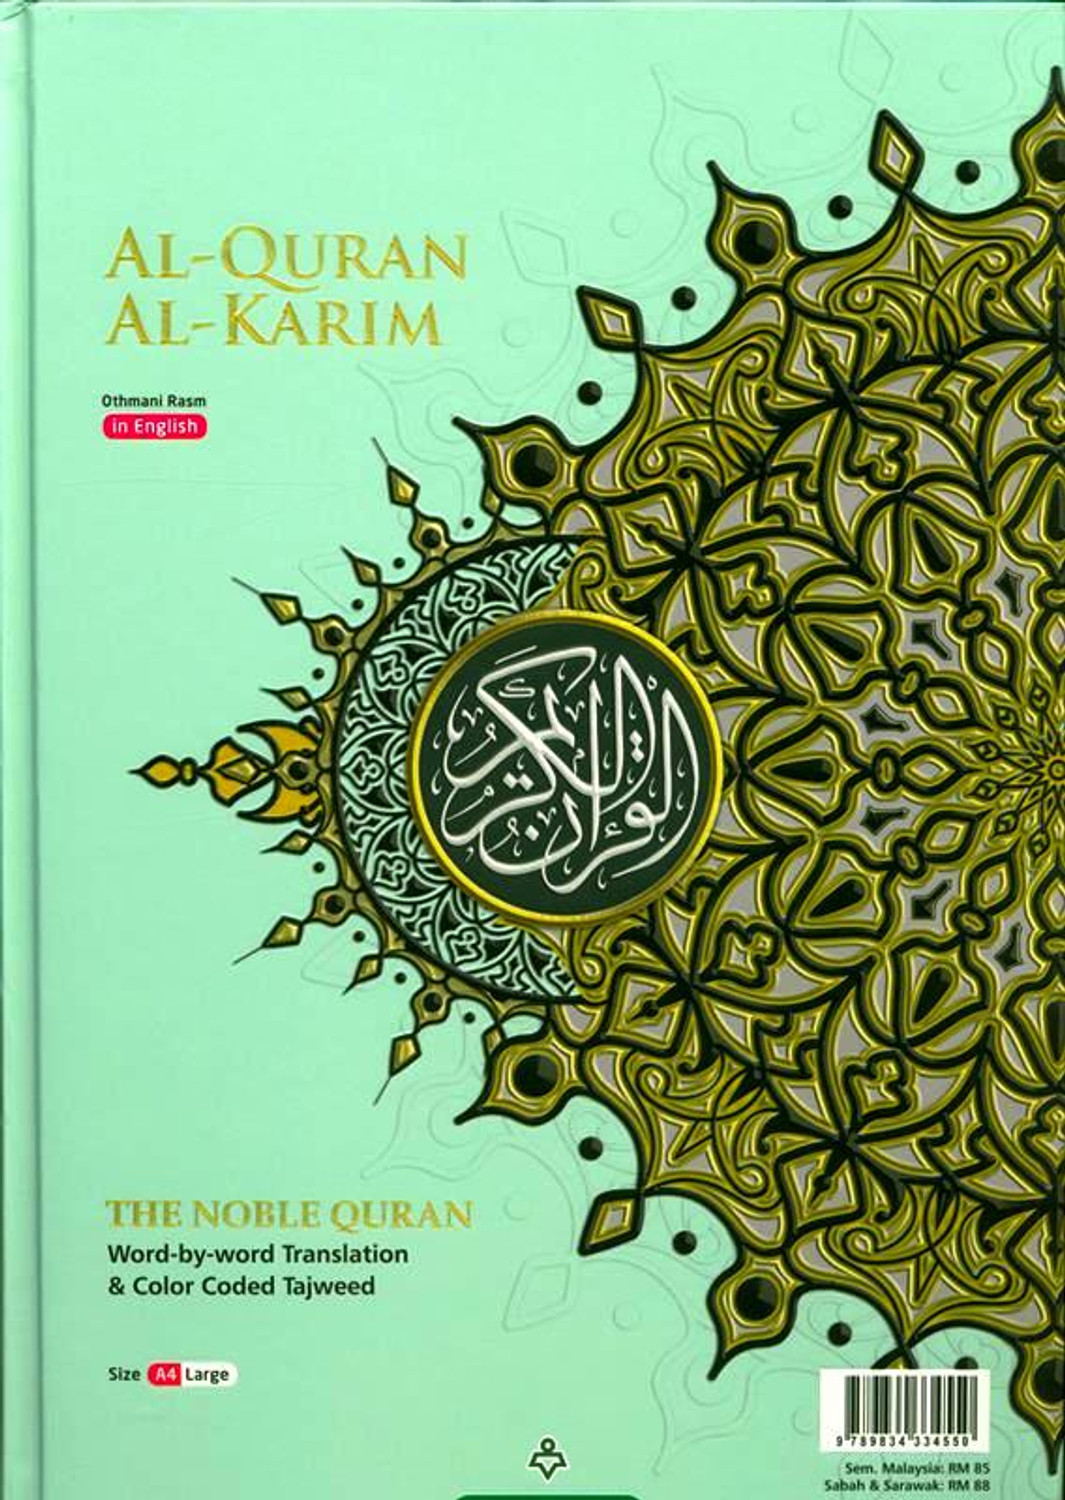 The Noble Quran Word-by-Word Translation & Color Coded Tajweed Usmani Font (Maqdis) (Green)